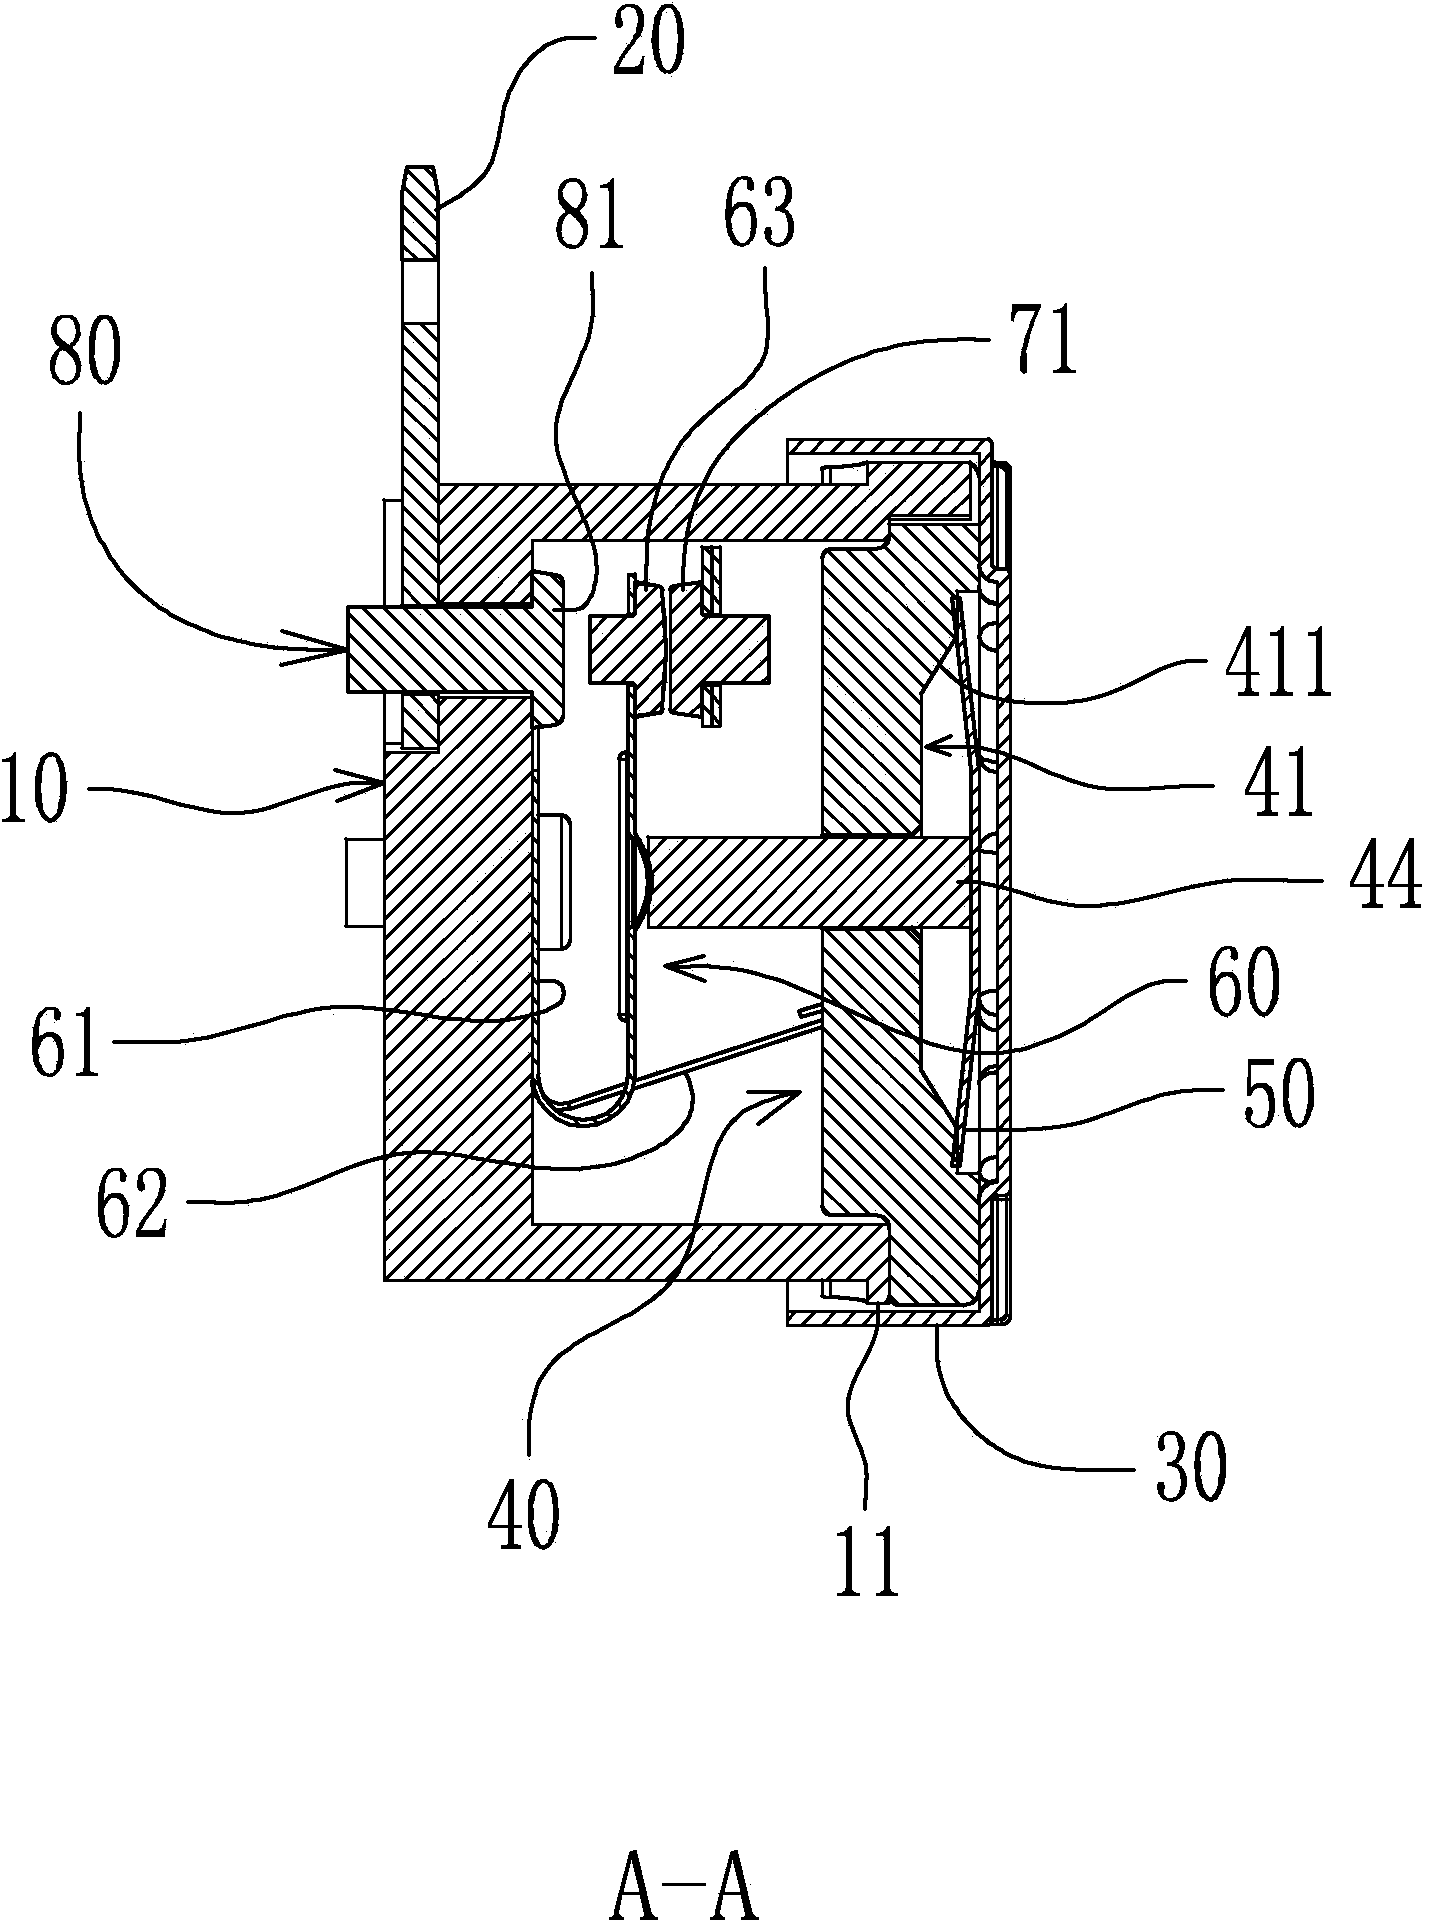 Spring-type power failure restoration temperature control switch capable of controlling multiple load circuits